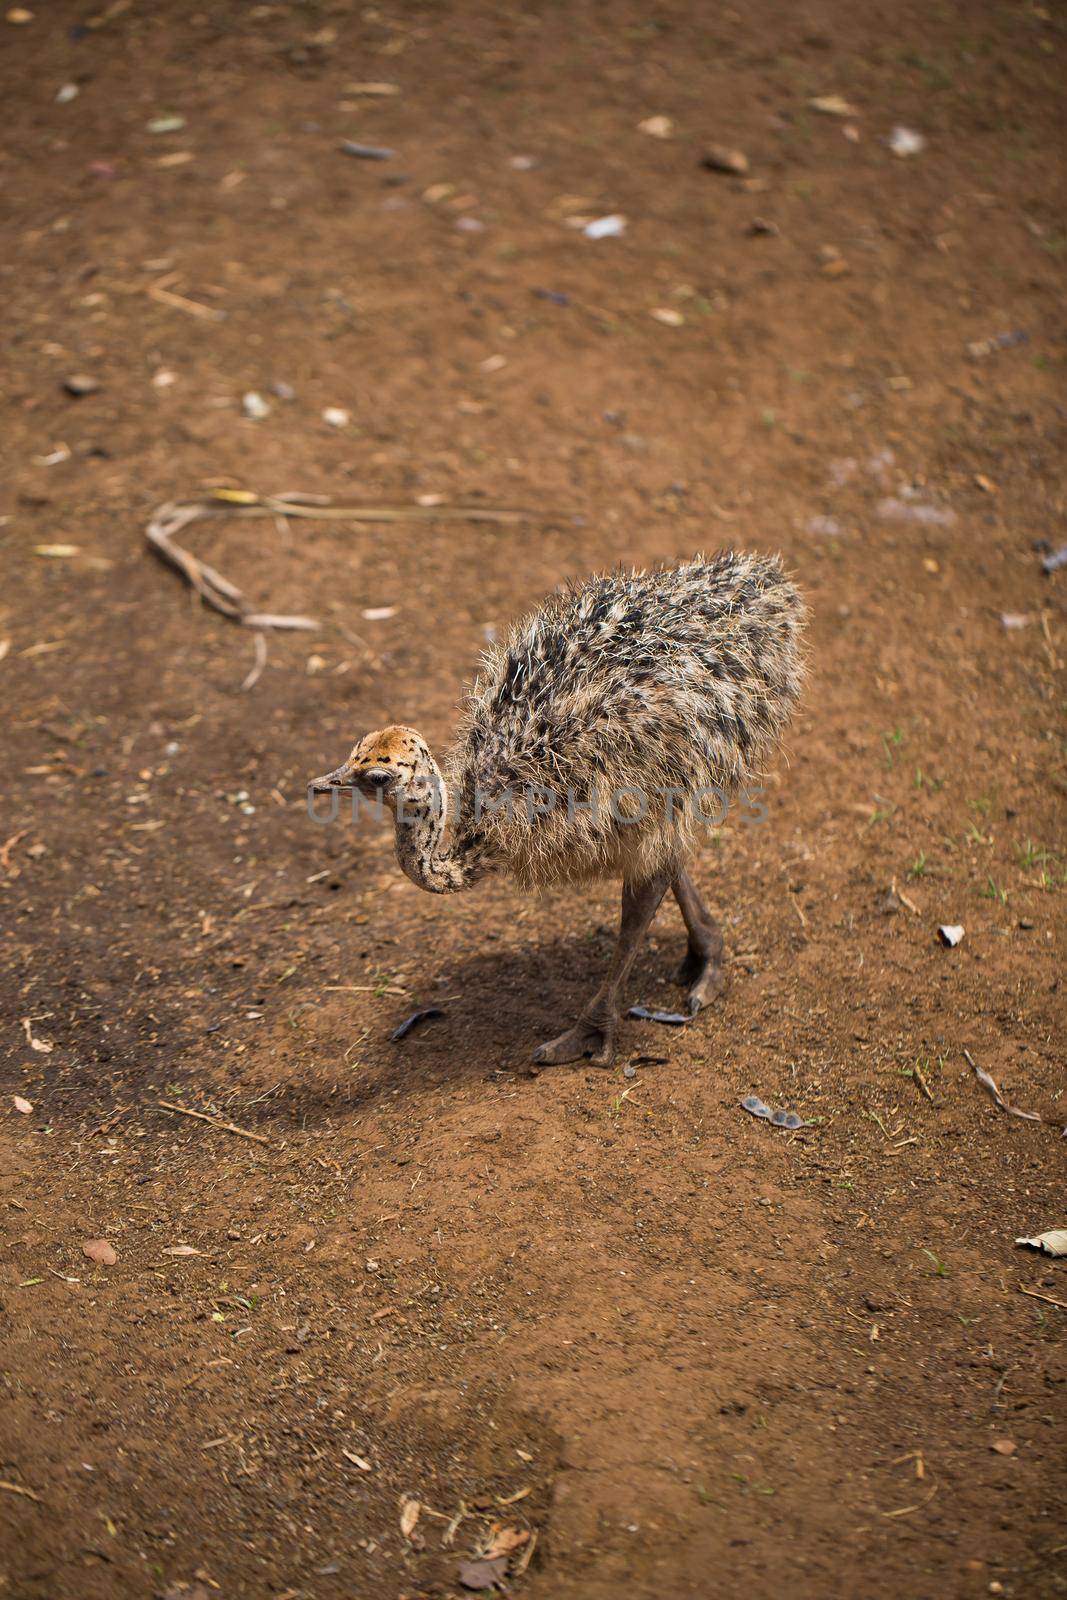 A charming ostrich child in a natural environment by StudioPeace